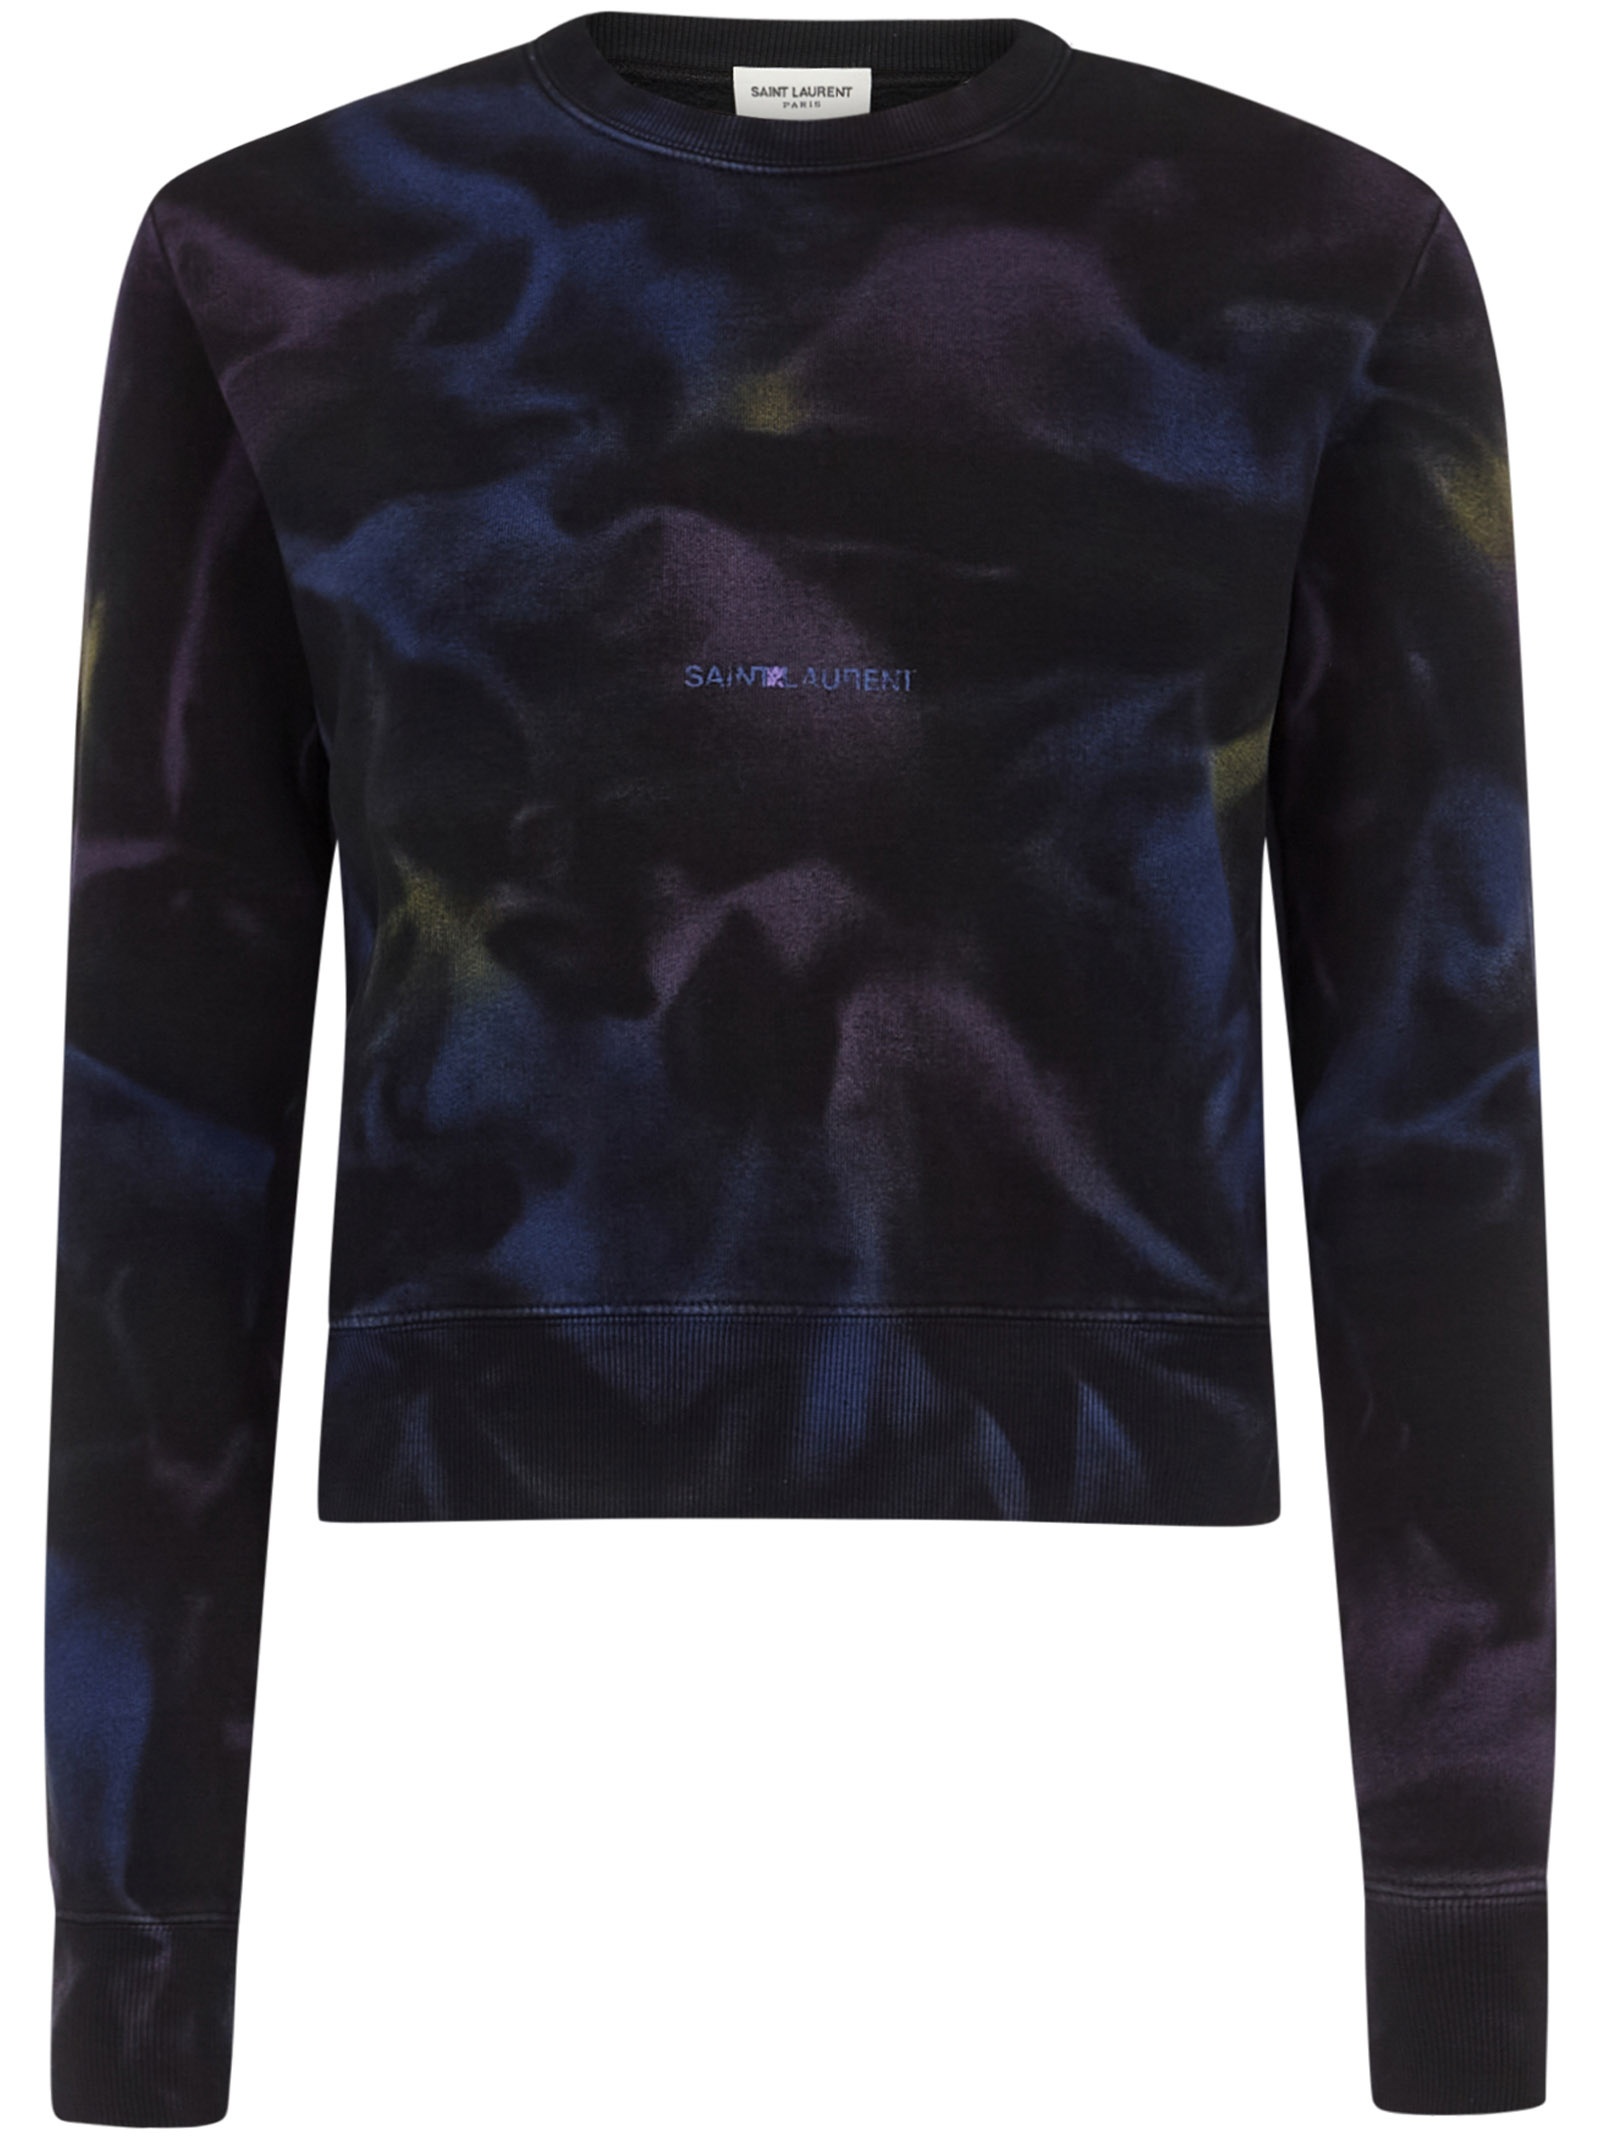 Black cotton short sweatshirt with all-over tie-dye pattern and front logo. - 1